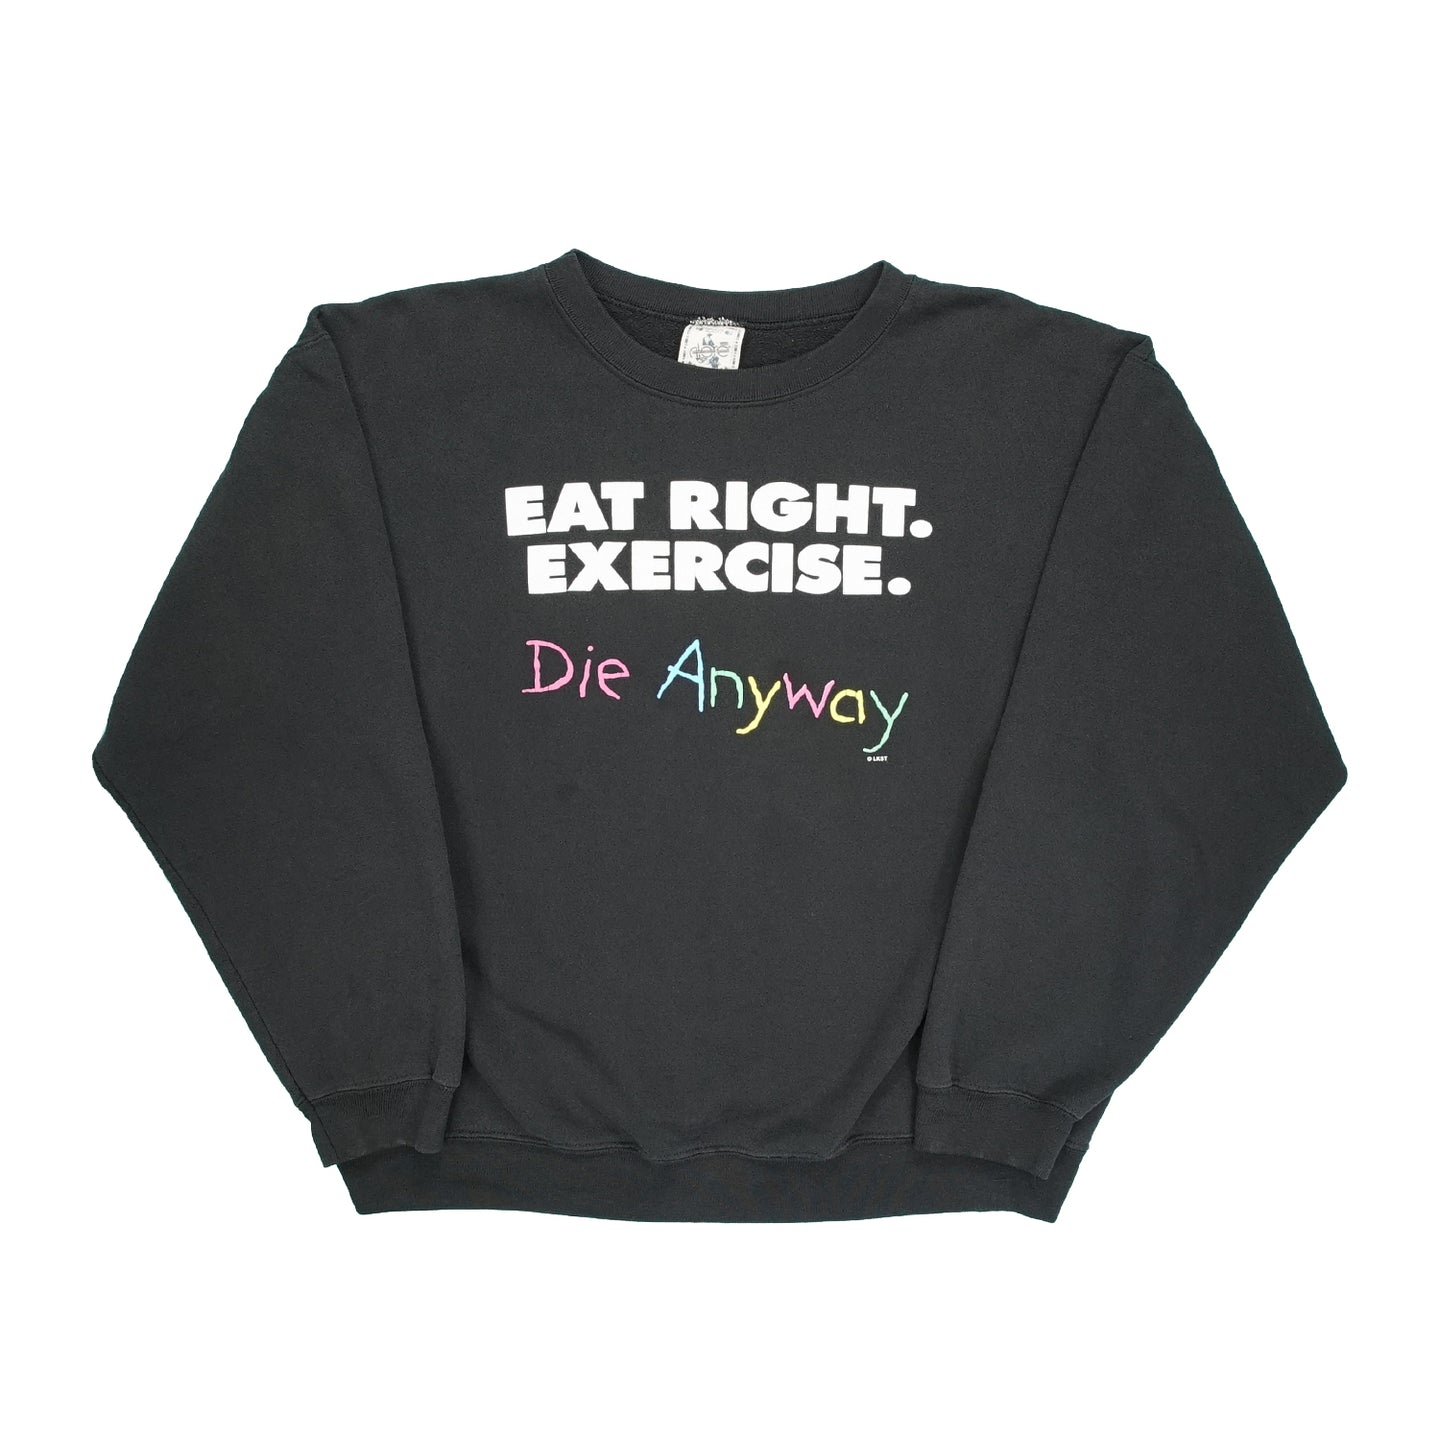 Eat Right. Exercise. Die Anyways crewneck L/XL